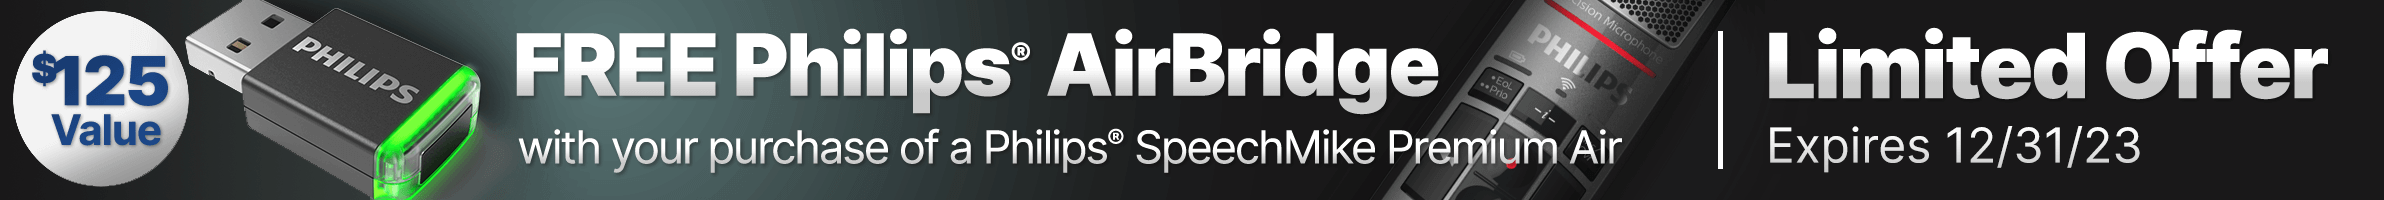 Limited offer, free AirBridge with SpeechMike Air purchase by 12/31/23